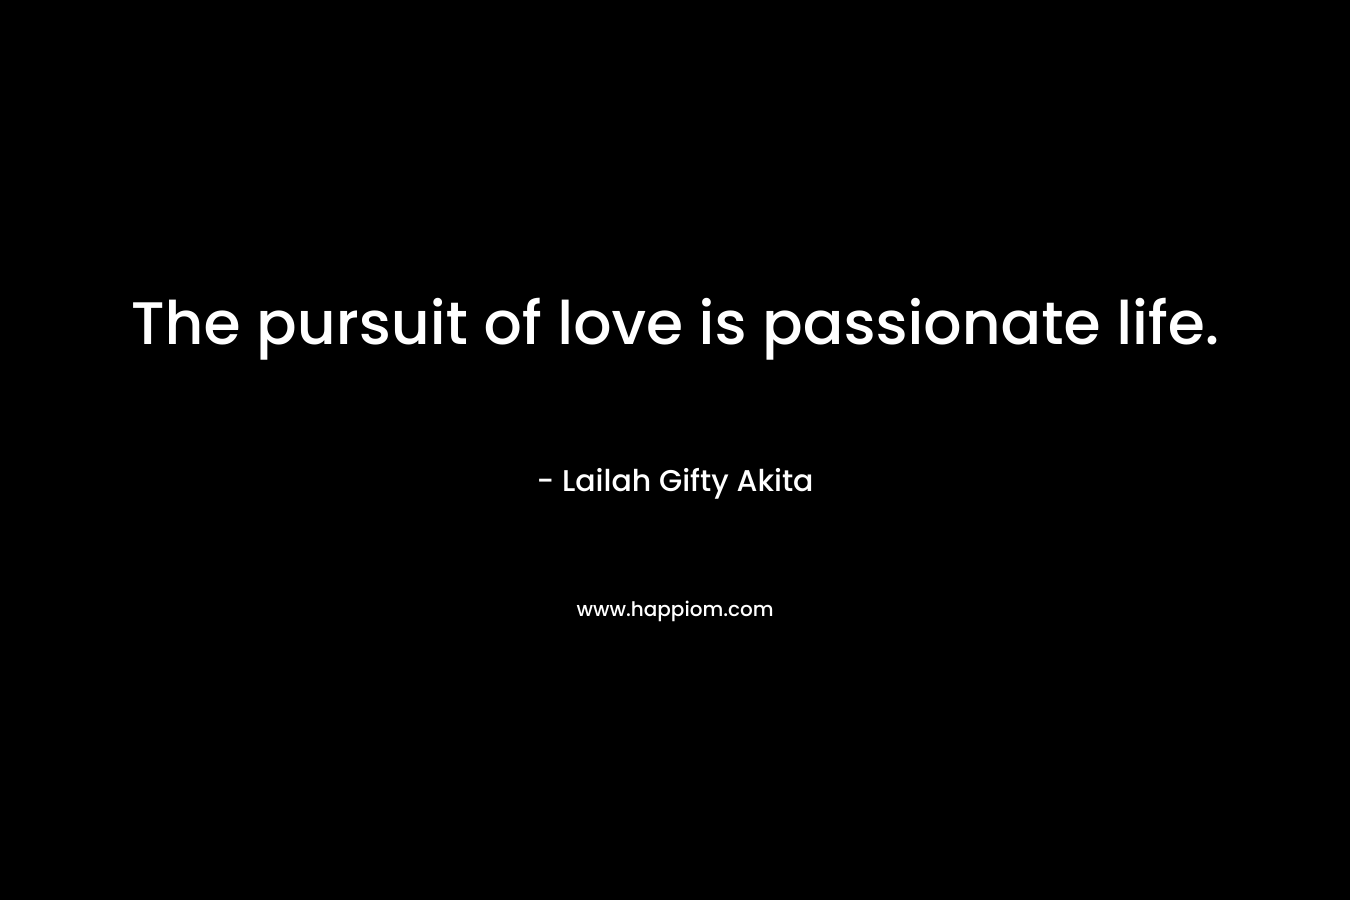 The pursuit of love is passionate life.